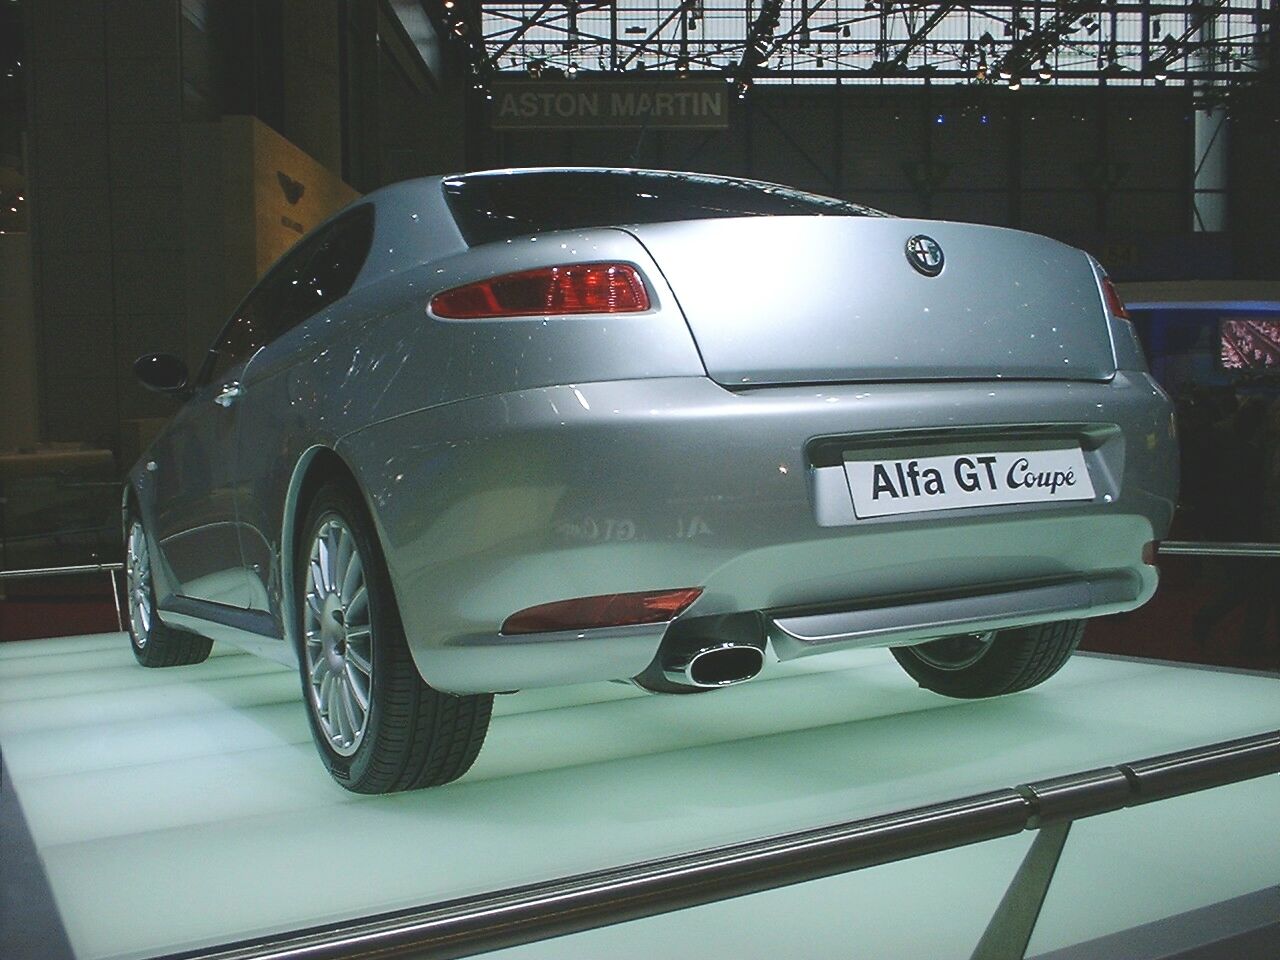 the new Alfa Romeo Coupe GT received its world premiere at the Geneva Motor Show this week